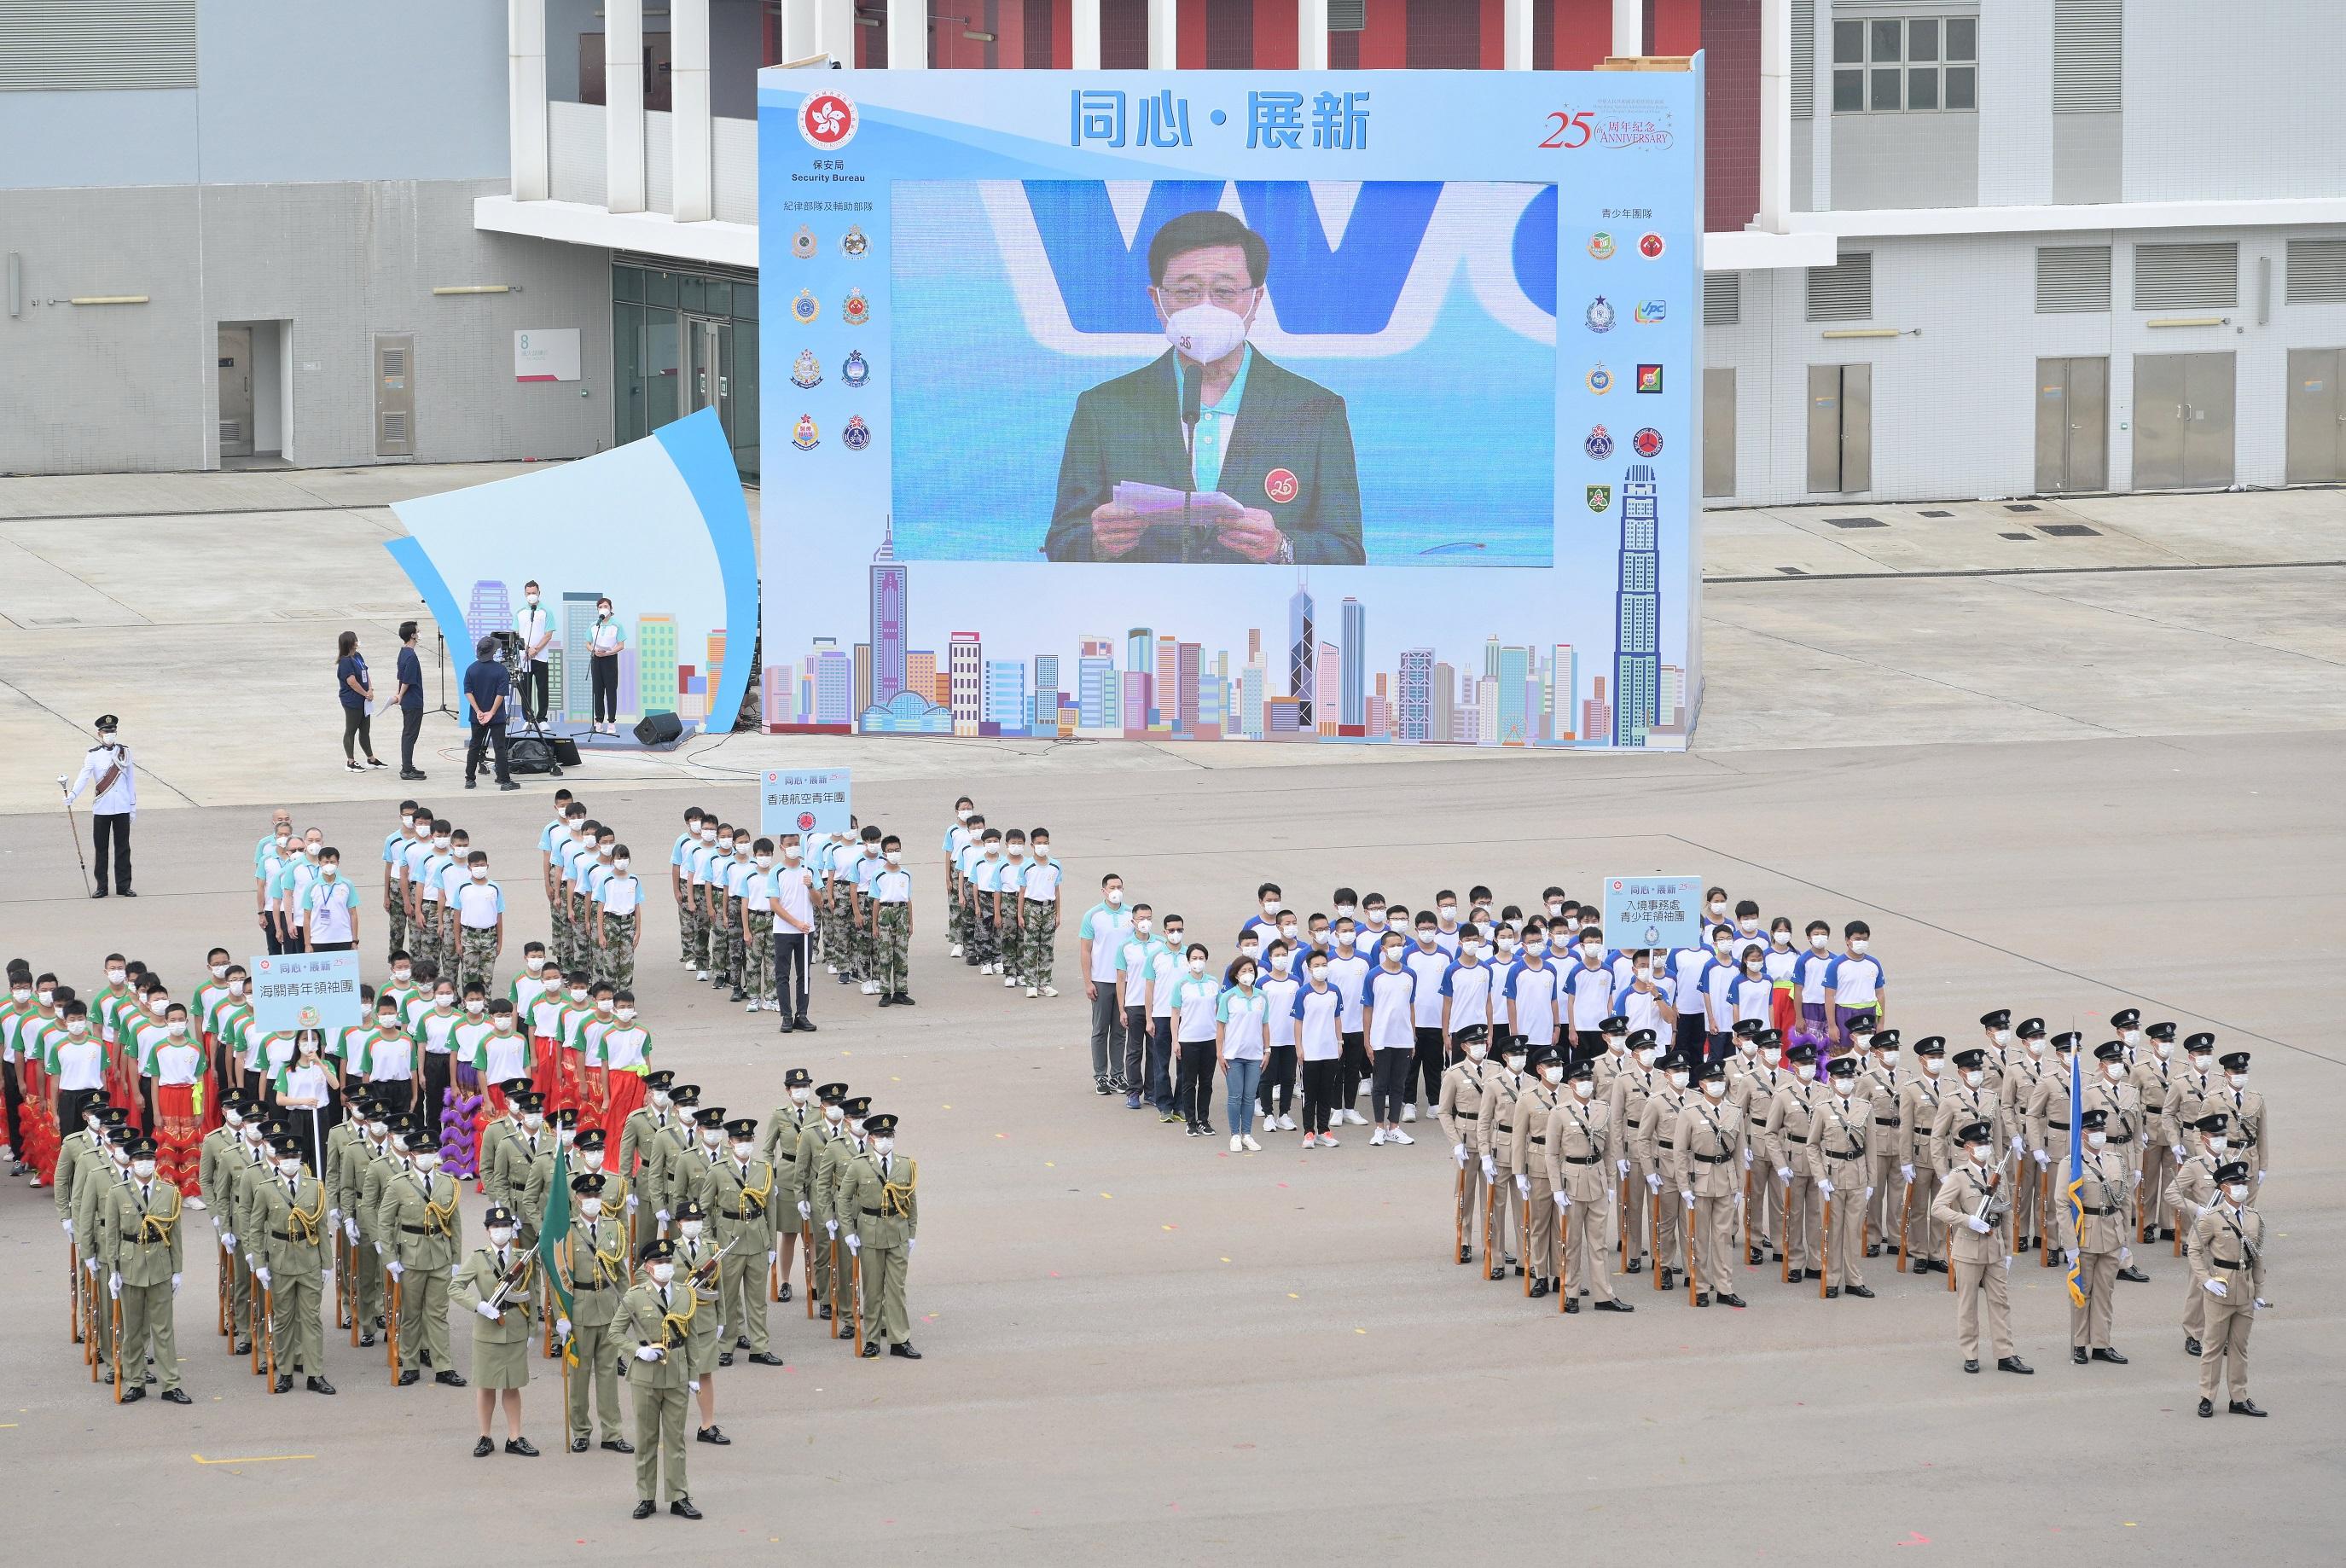 The Security Bureau led the disciplined services, auxiliary services and nine youth groups to hold the "Together We Prosper" Grand Parade by Disciplined Services and Youth Groups for Celebrating the 73rd Anniversary of the Founding of the People’s Republic of China and the 25th Anniversary of the Establishment of the Hong Kong Special Administrative Region at the Fire and Ambulance Services Academy in Tseung Kwan O today (September 24). Photo shows the Chief Executive, Mr John Lee delivering the speech at the grand parade.